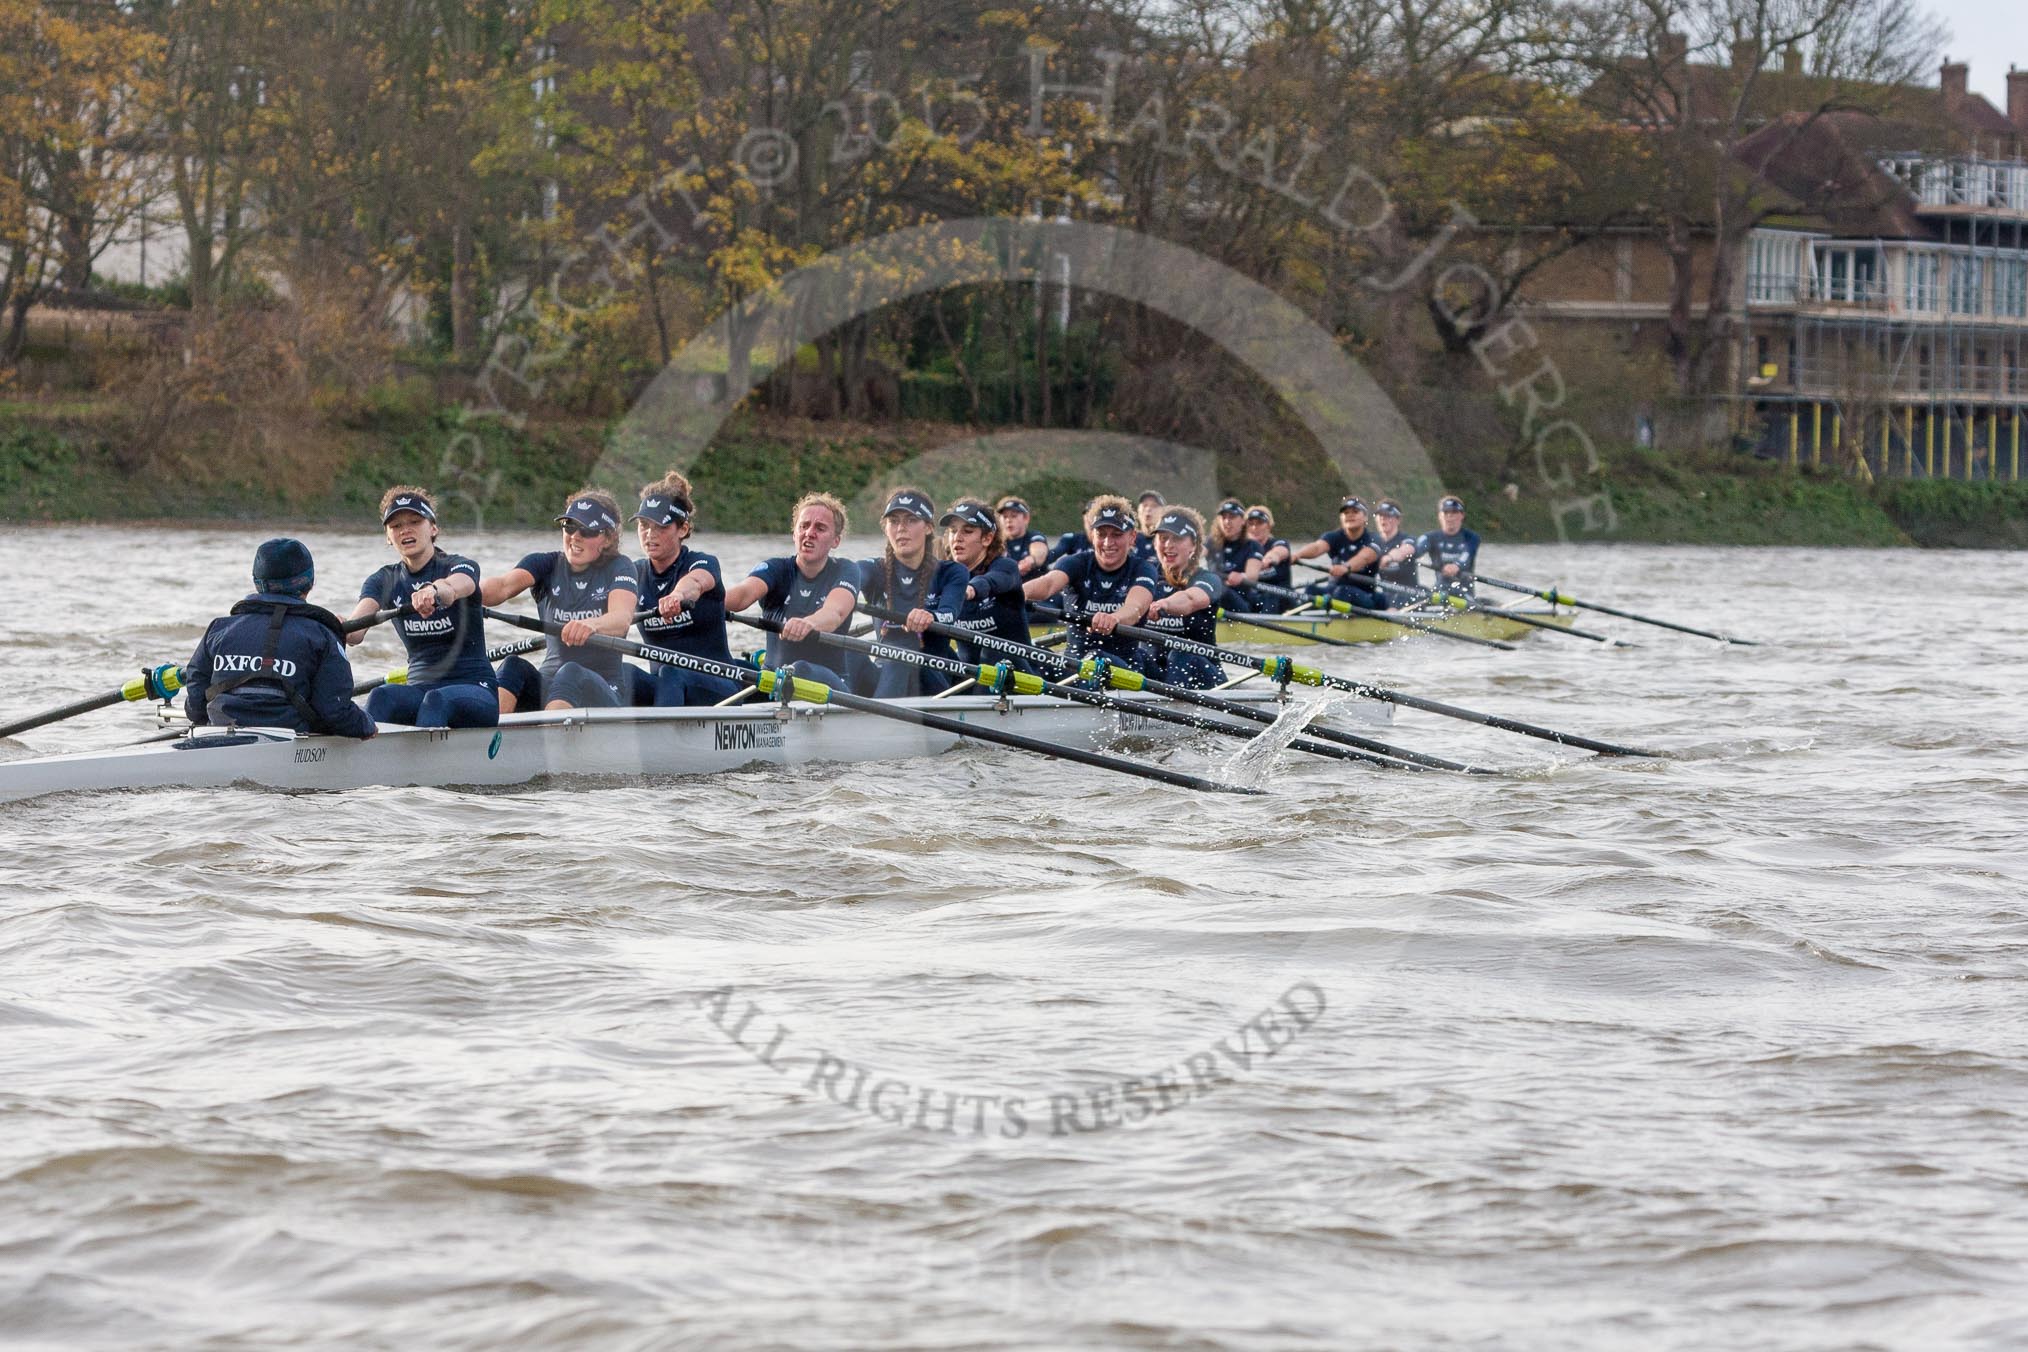 The Boat Race season 2016 - Women's Boat Race Trial Eights (OUWBC, Oxford): "Scylla" and "Charybdis" behind Barnes Railway Bridge, with "Charybdis" in the lead.
River Thames between Putney Bridge and Mortlake,
London SW15,

United Kingdom,
on 10 December 2015 at 12:35, image #301